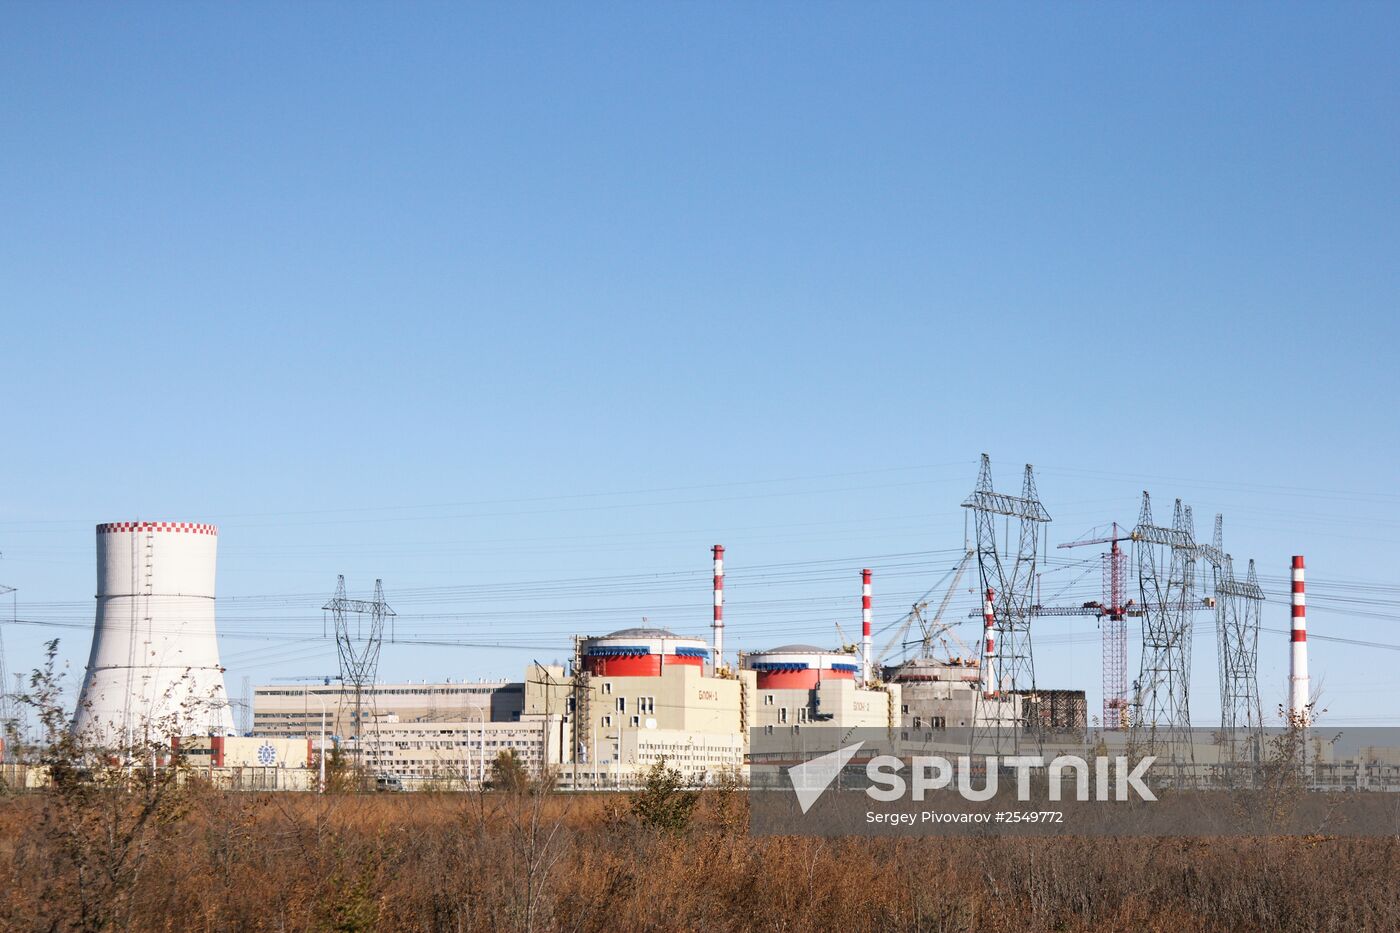 Rostov nuclear power plant